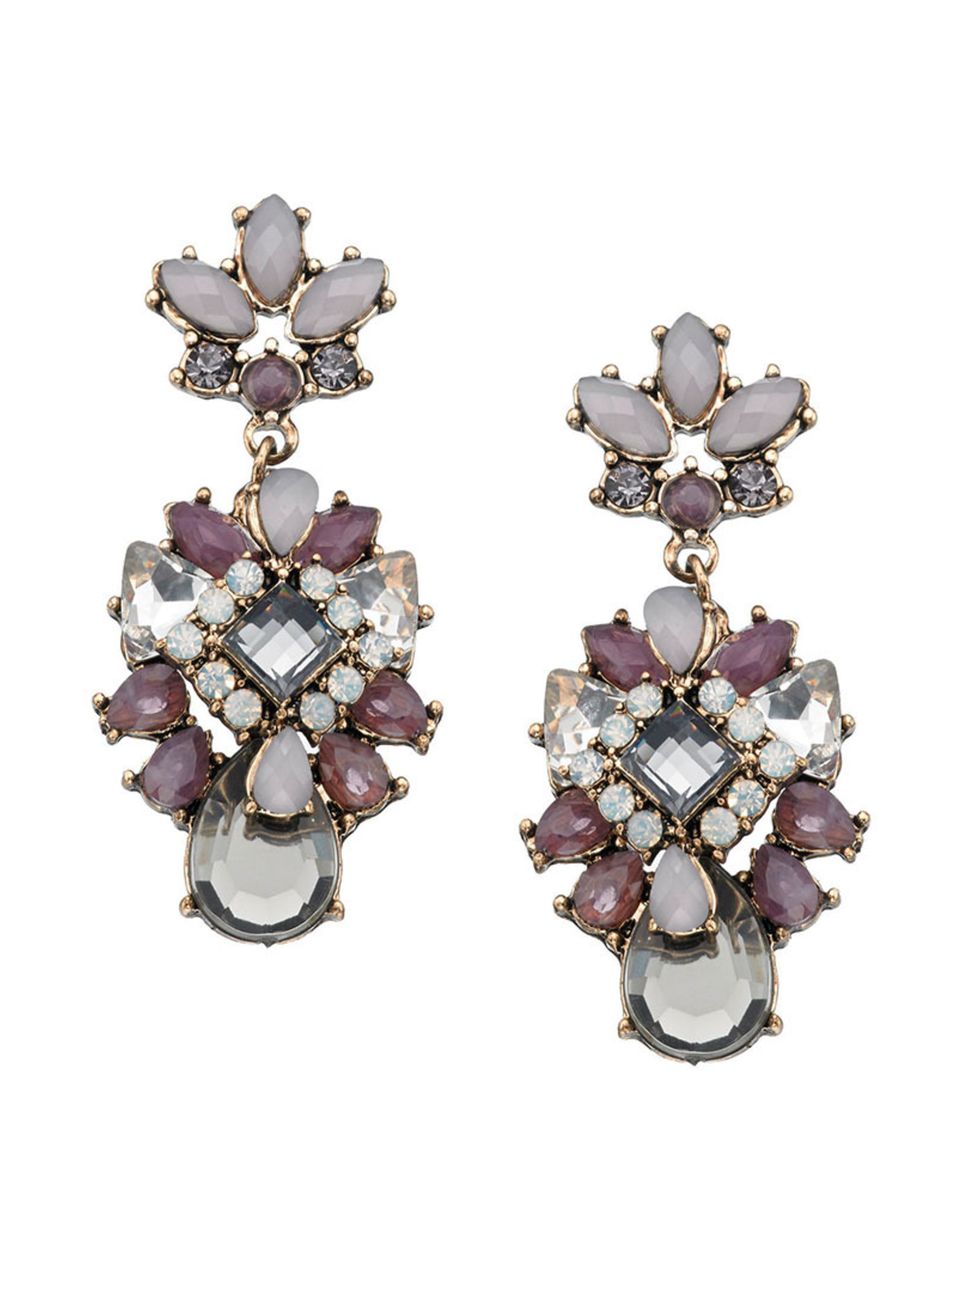 <p>For more subdued sparkle, go for these muted purple drop earrings.</p>

<p>Rio chandelier earrings, £14, from <a href="http://uk.accessorize.com/view/product/uk_catalog/acc_2,acc_2.4/6810503500" target="_blank">Accessorize</a>.</p>